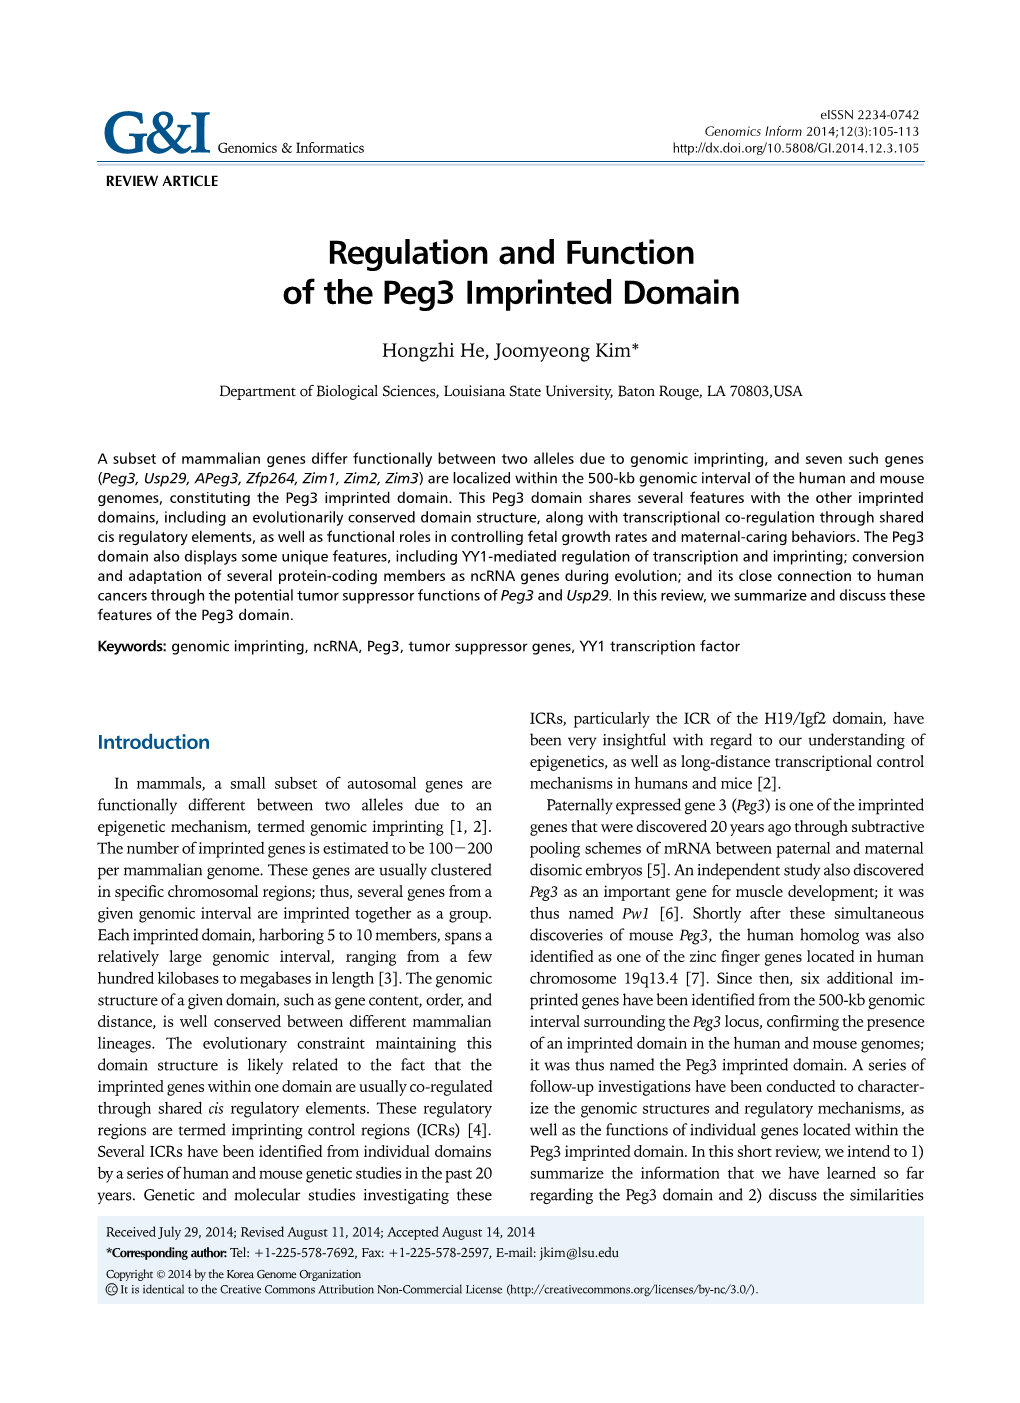 Regulation and Function of the Peg3 Imprinted Domain